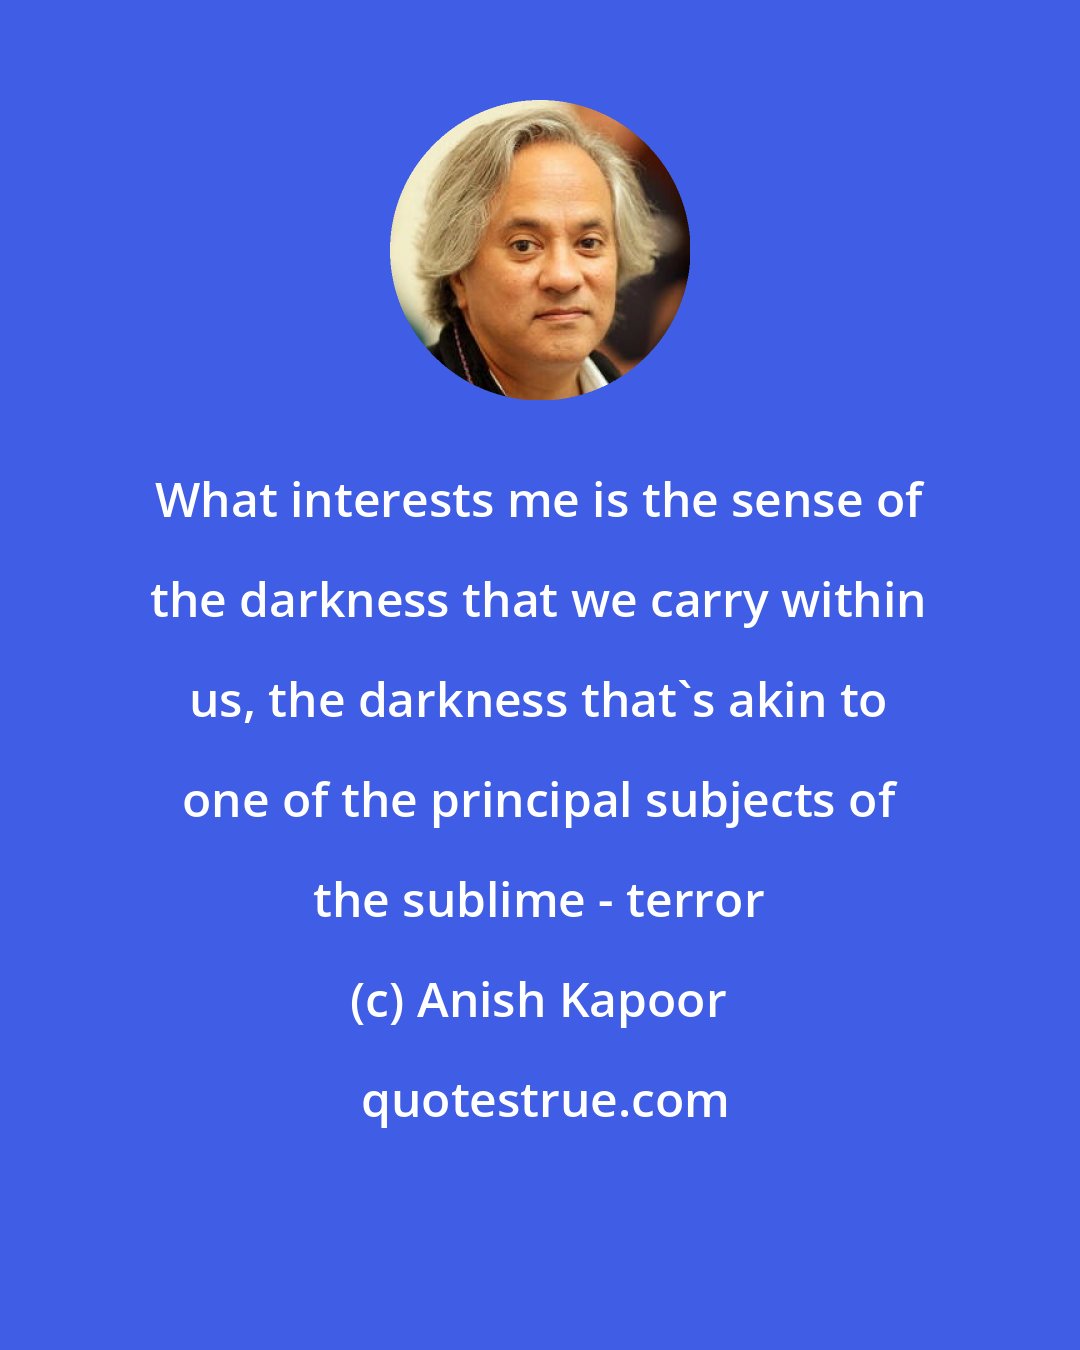 Anish Kapoor: What interests me is the sense of the darkness that we carry within us, the darkness that's akin to one of the principal subjects of the sublime - terror